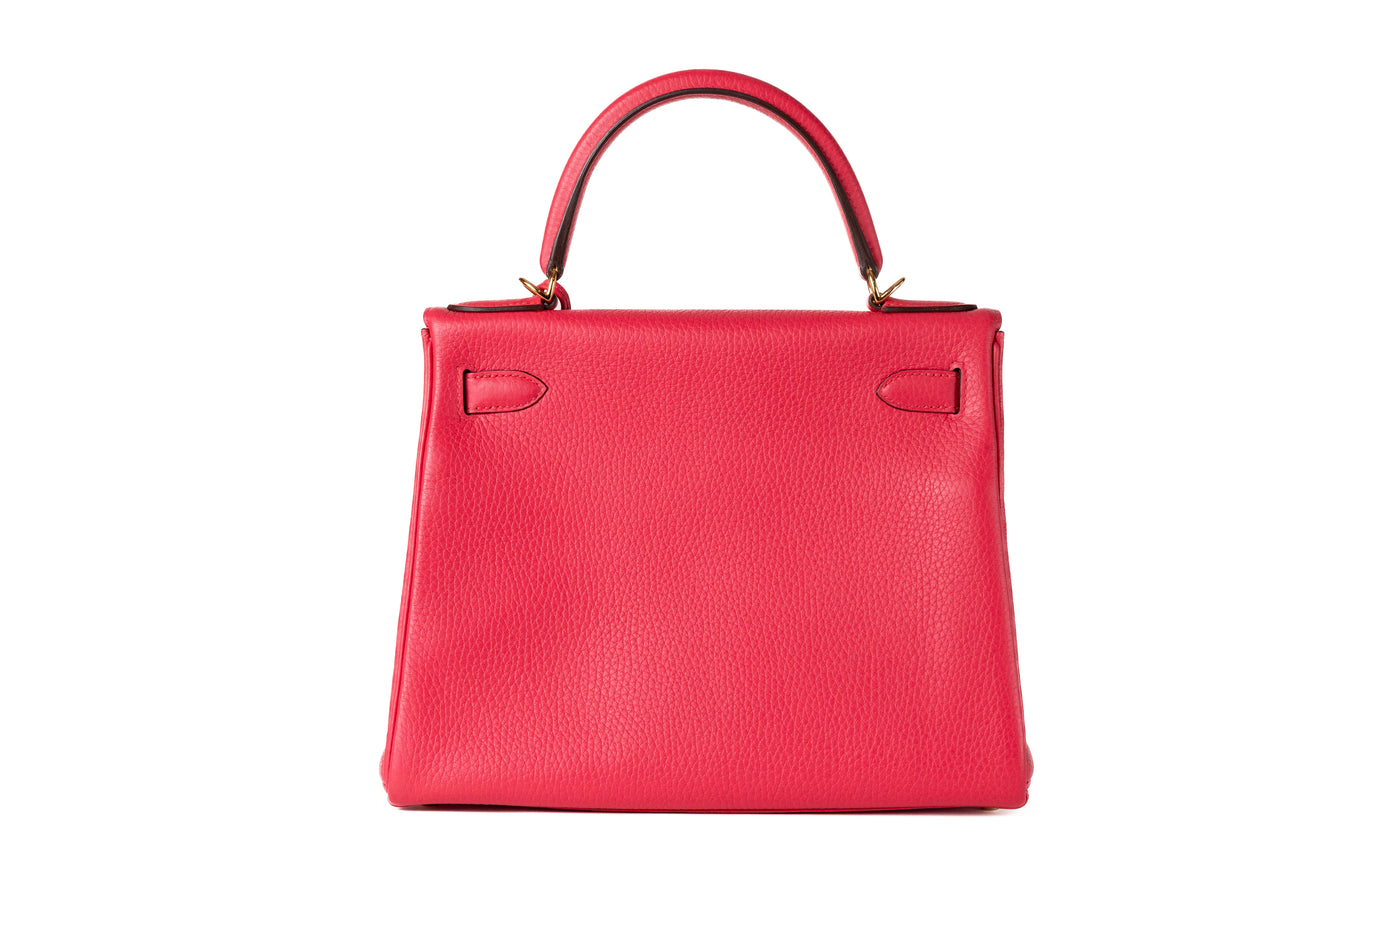 #D Hermes 28cm Rose Extreme Clemence Kelly w/ Gold Hardware